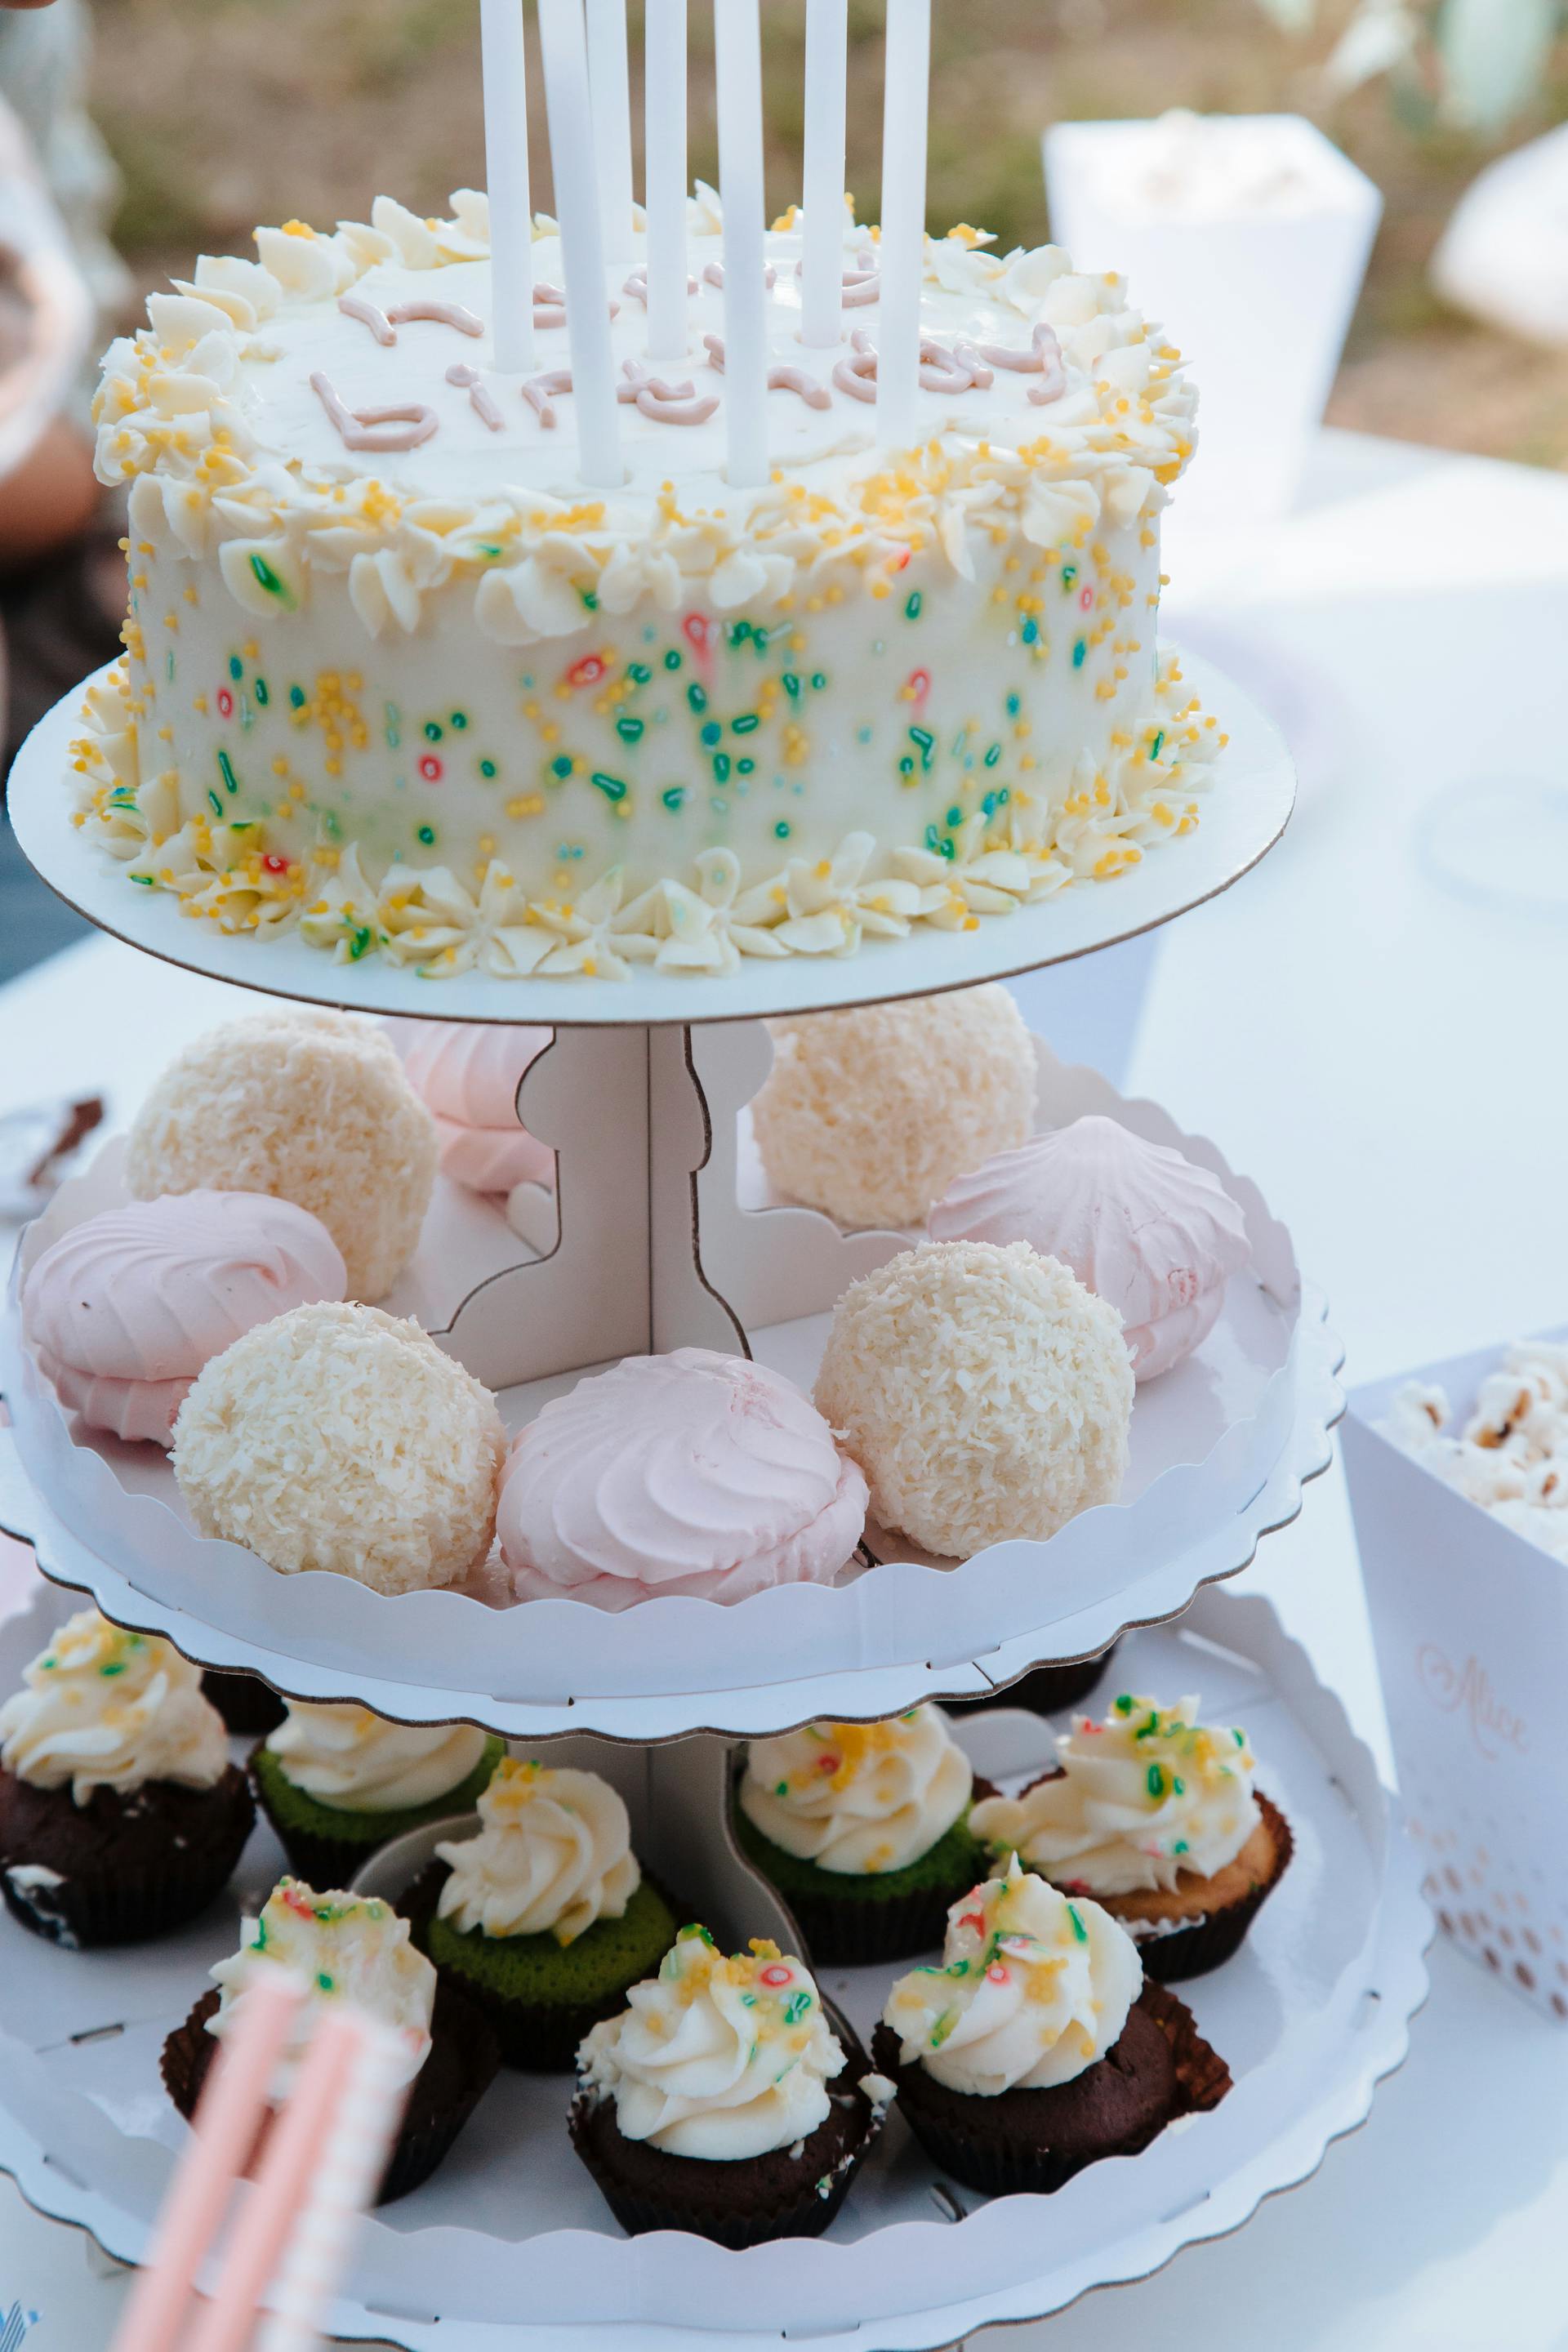 Cupcakes and birthday cake on a cake-stand | Source: Pexels